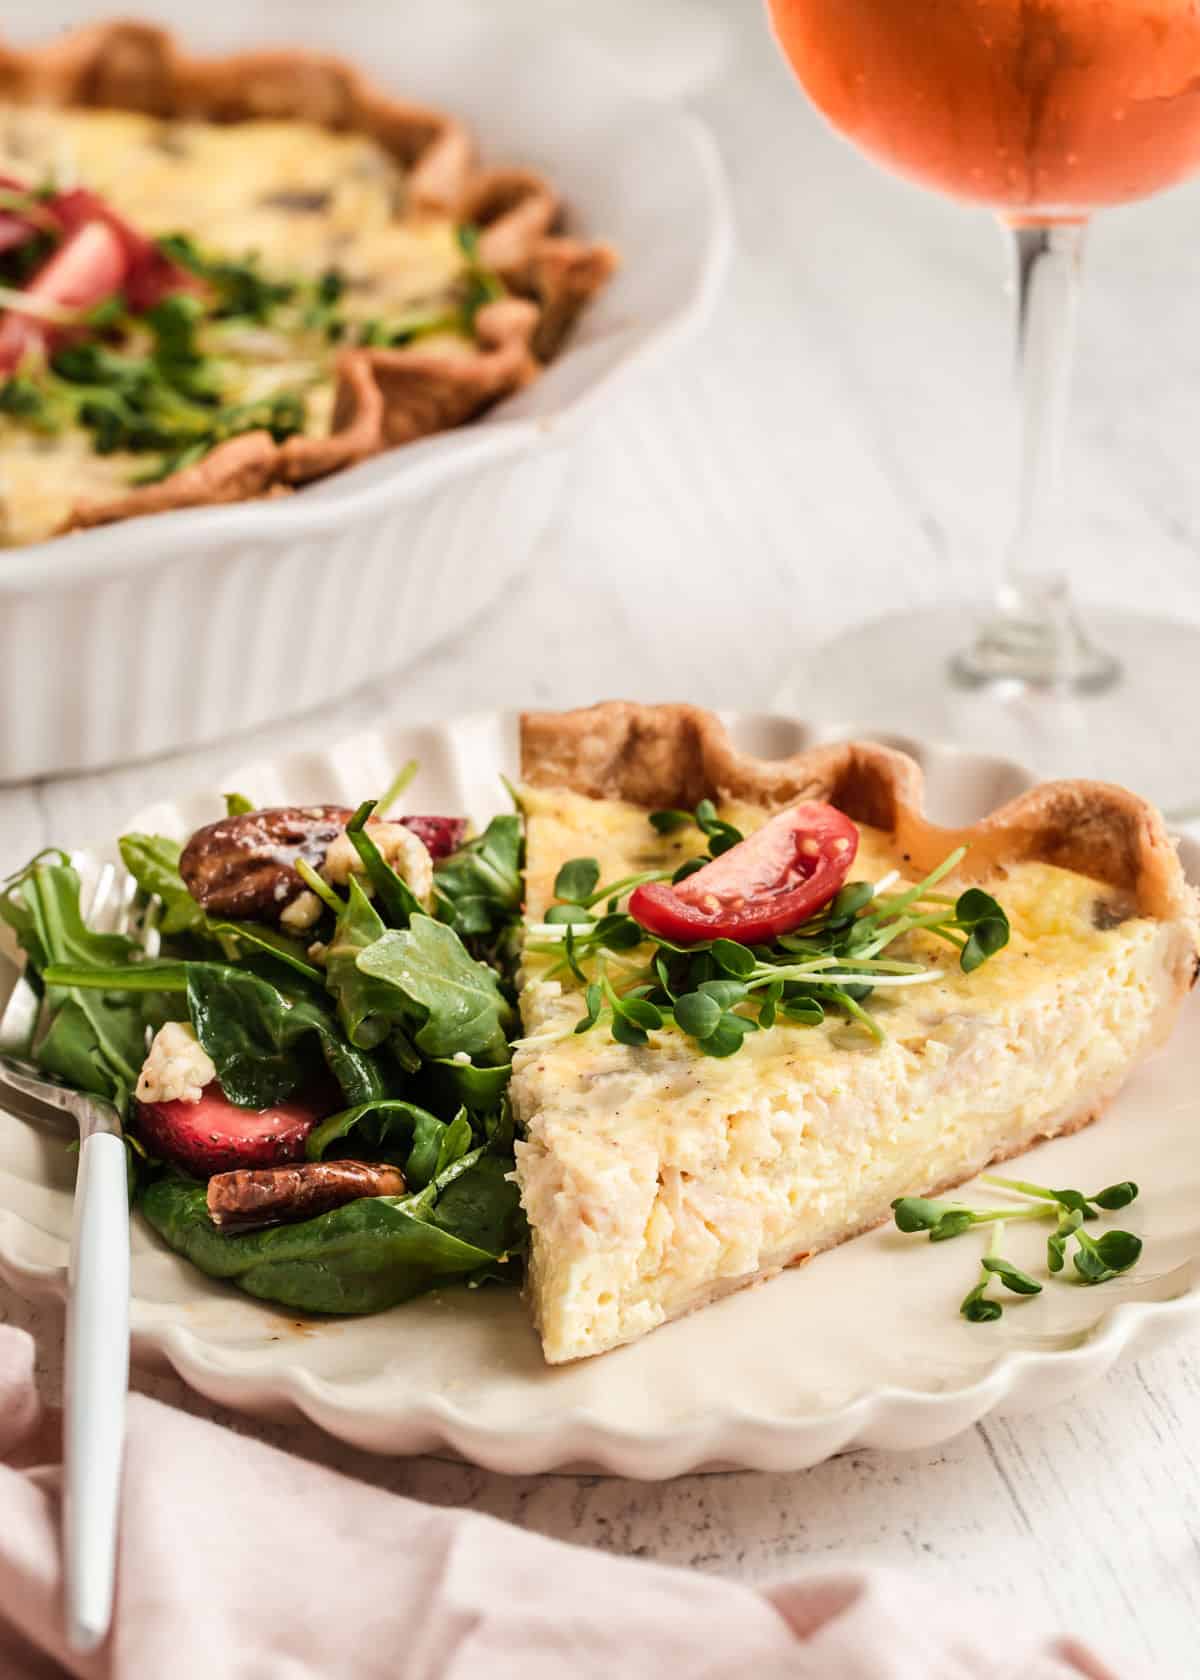 slice of quiche on white plate with salad on the side.